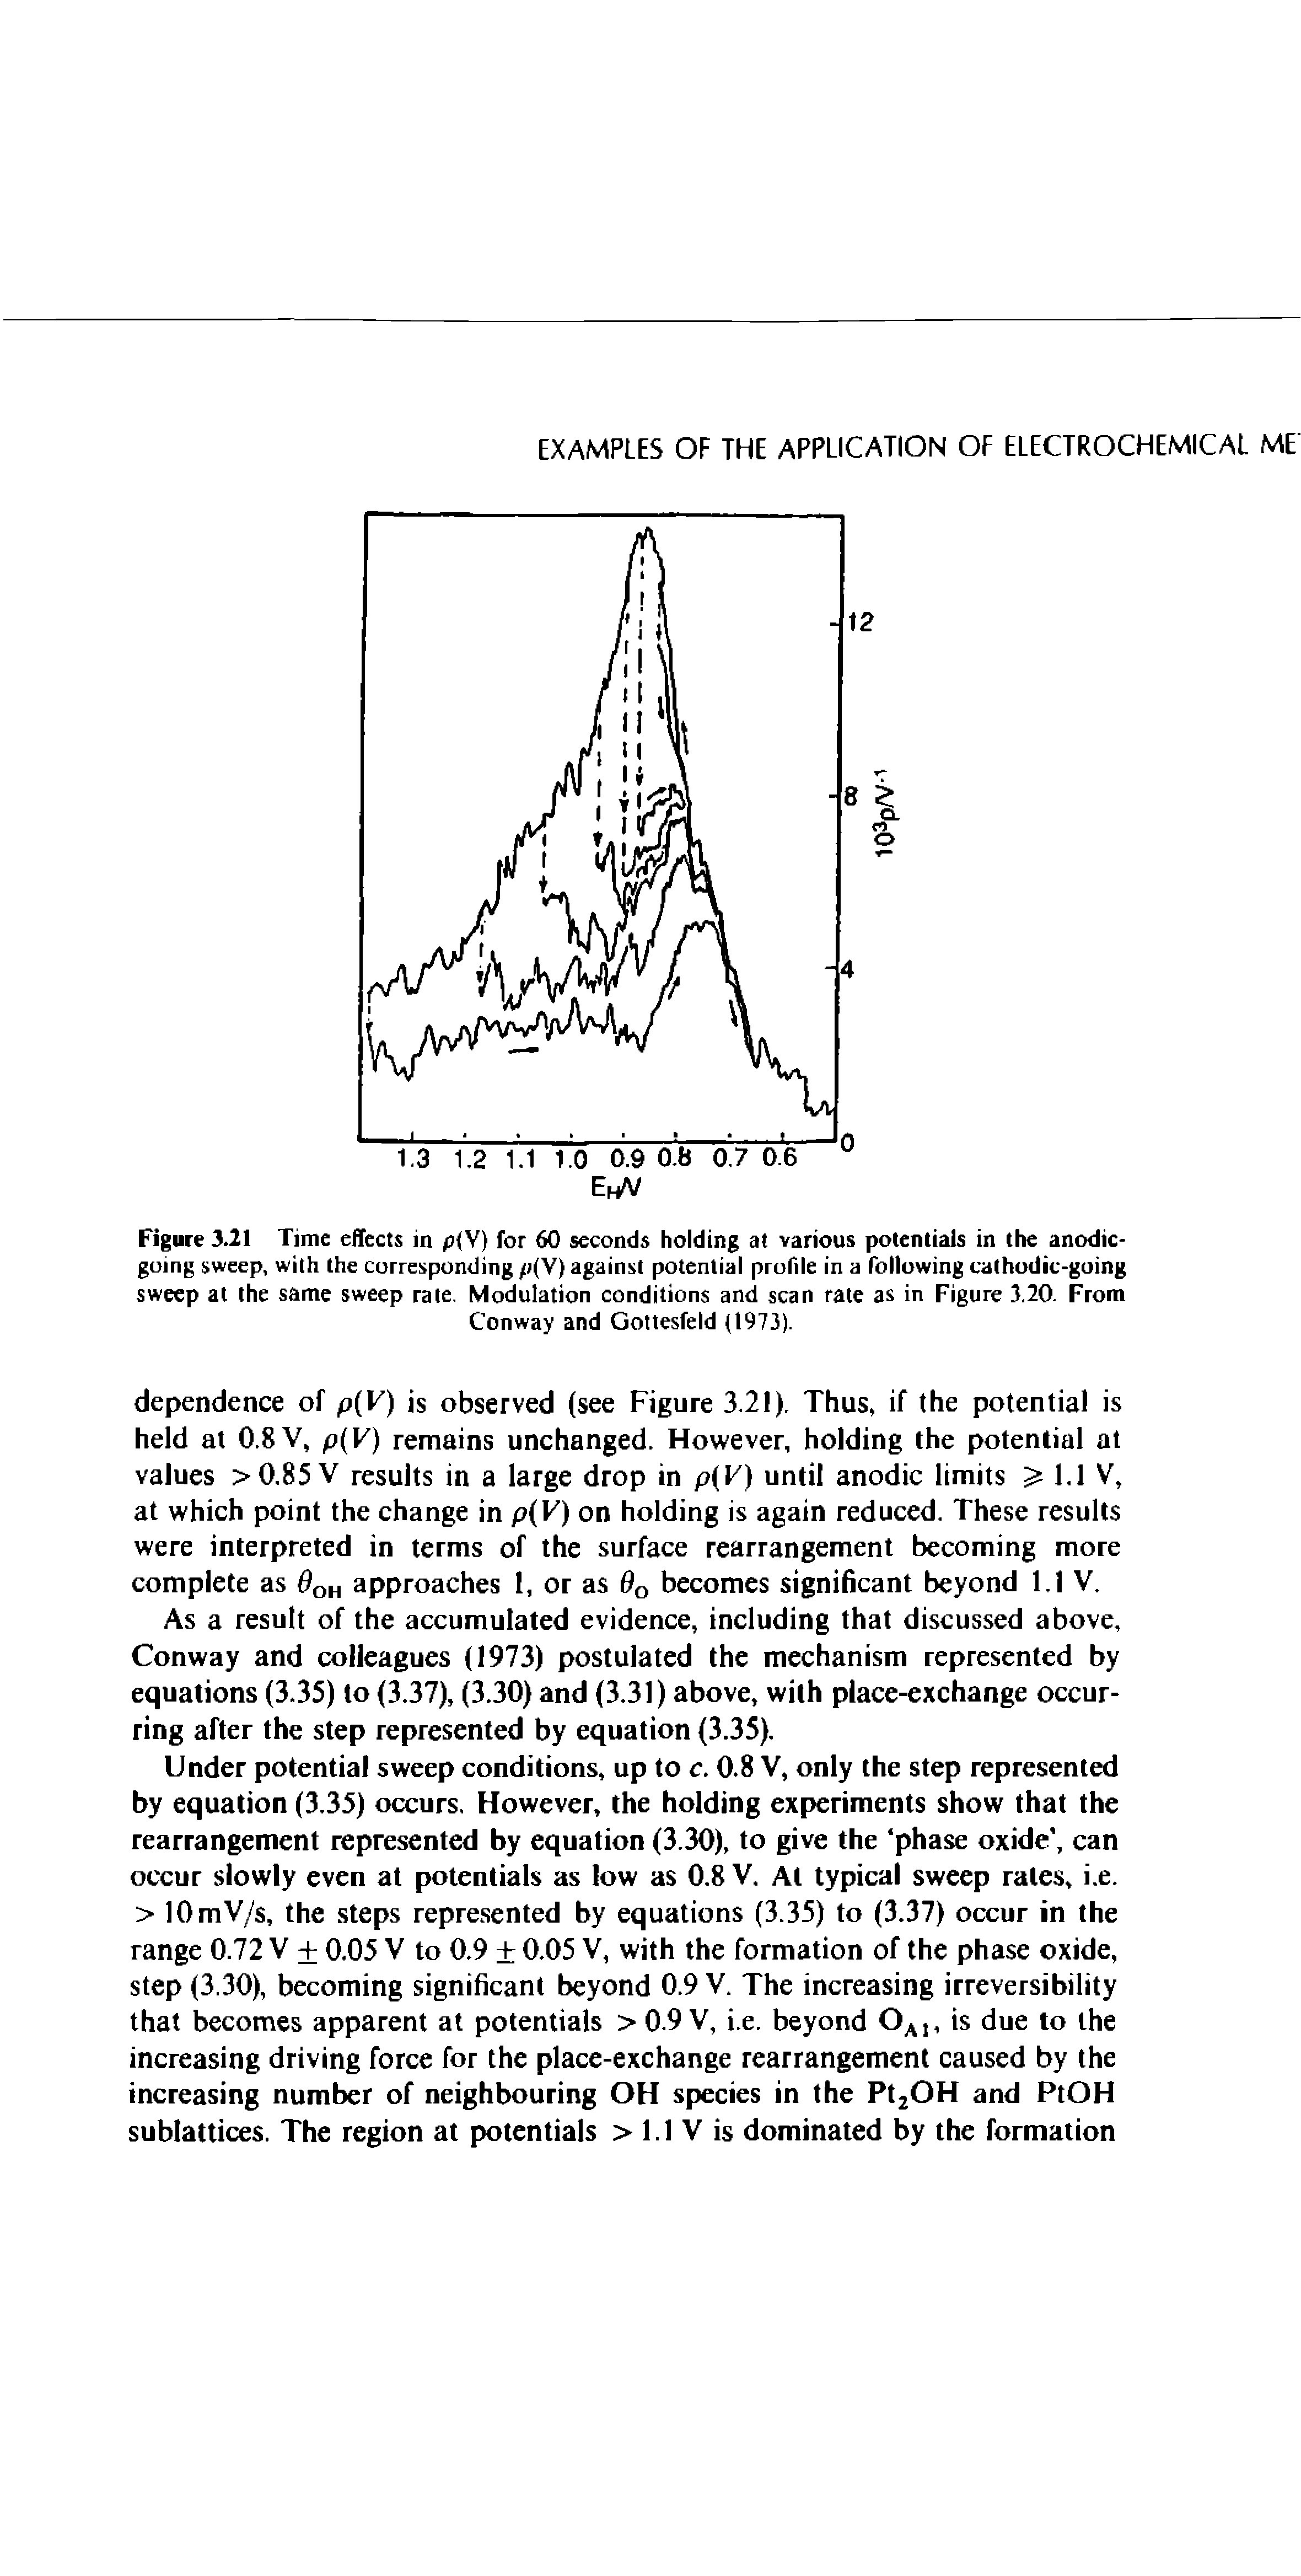 Figure 3.21 Time effects in p(V) for 60 seconds holding at various potentials in the anodic-going sweep, with the corresponding p(V) against potential profile in a following cathodic-going sweep at the same sweep rate. Modulation conditions and scan rate as in Figure 3.20. From...